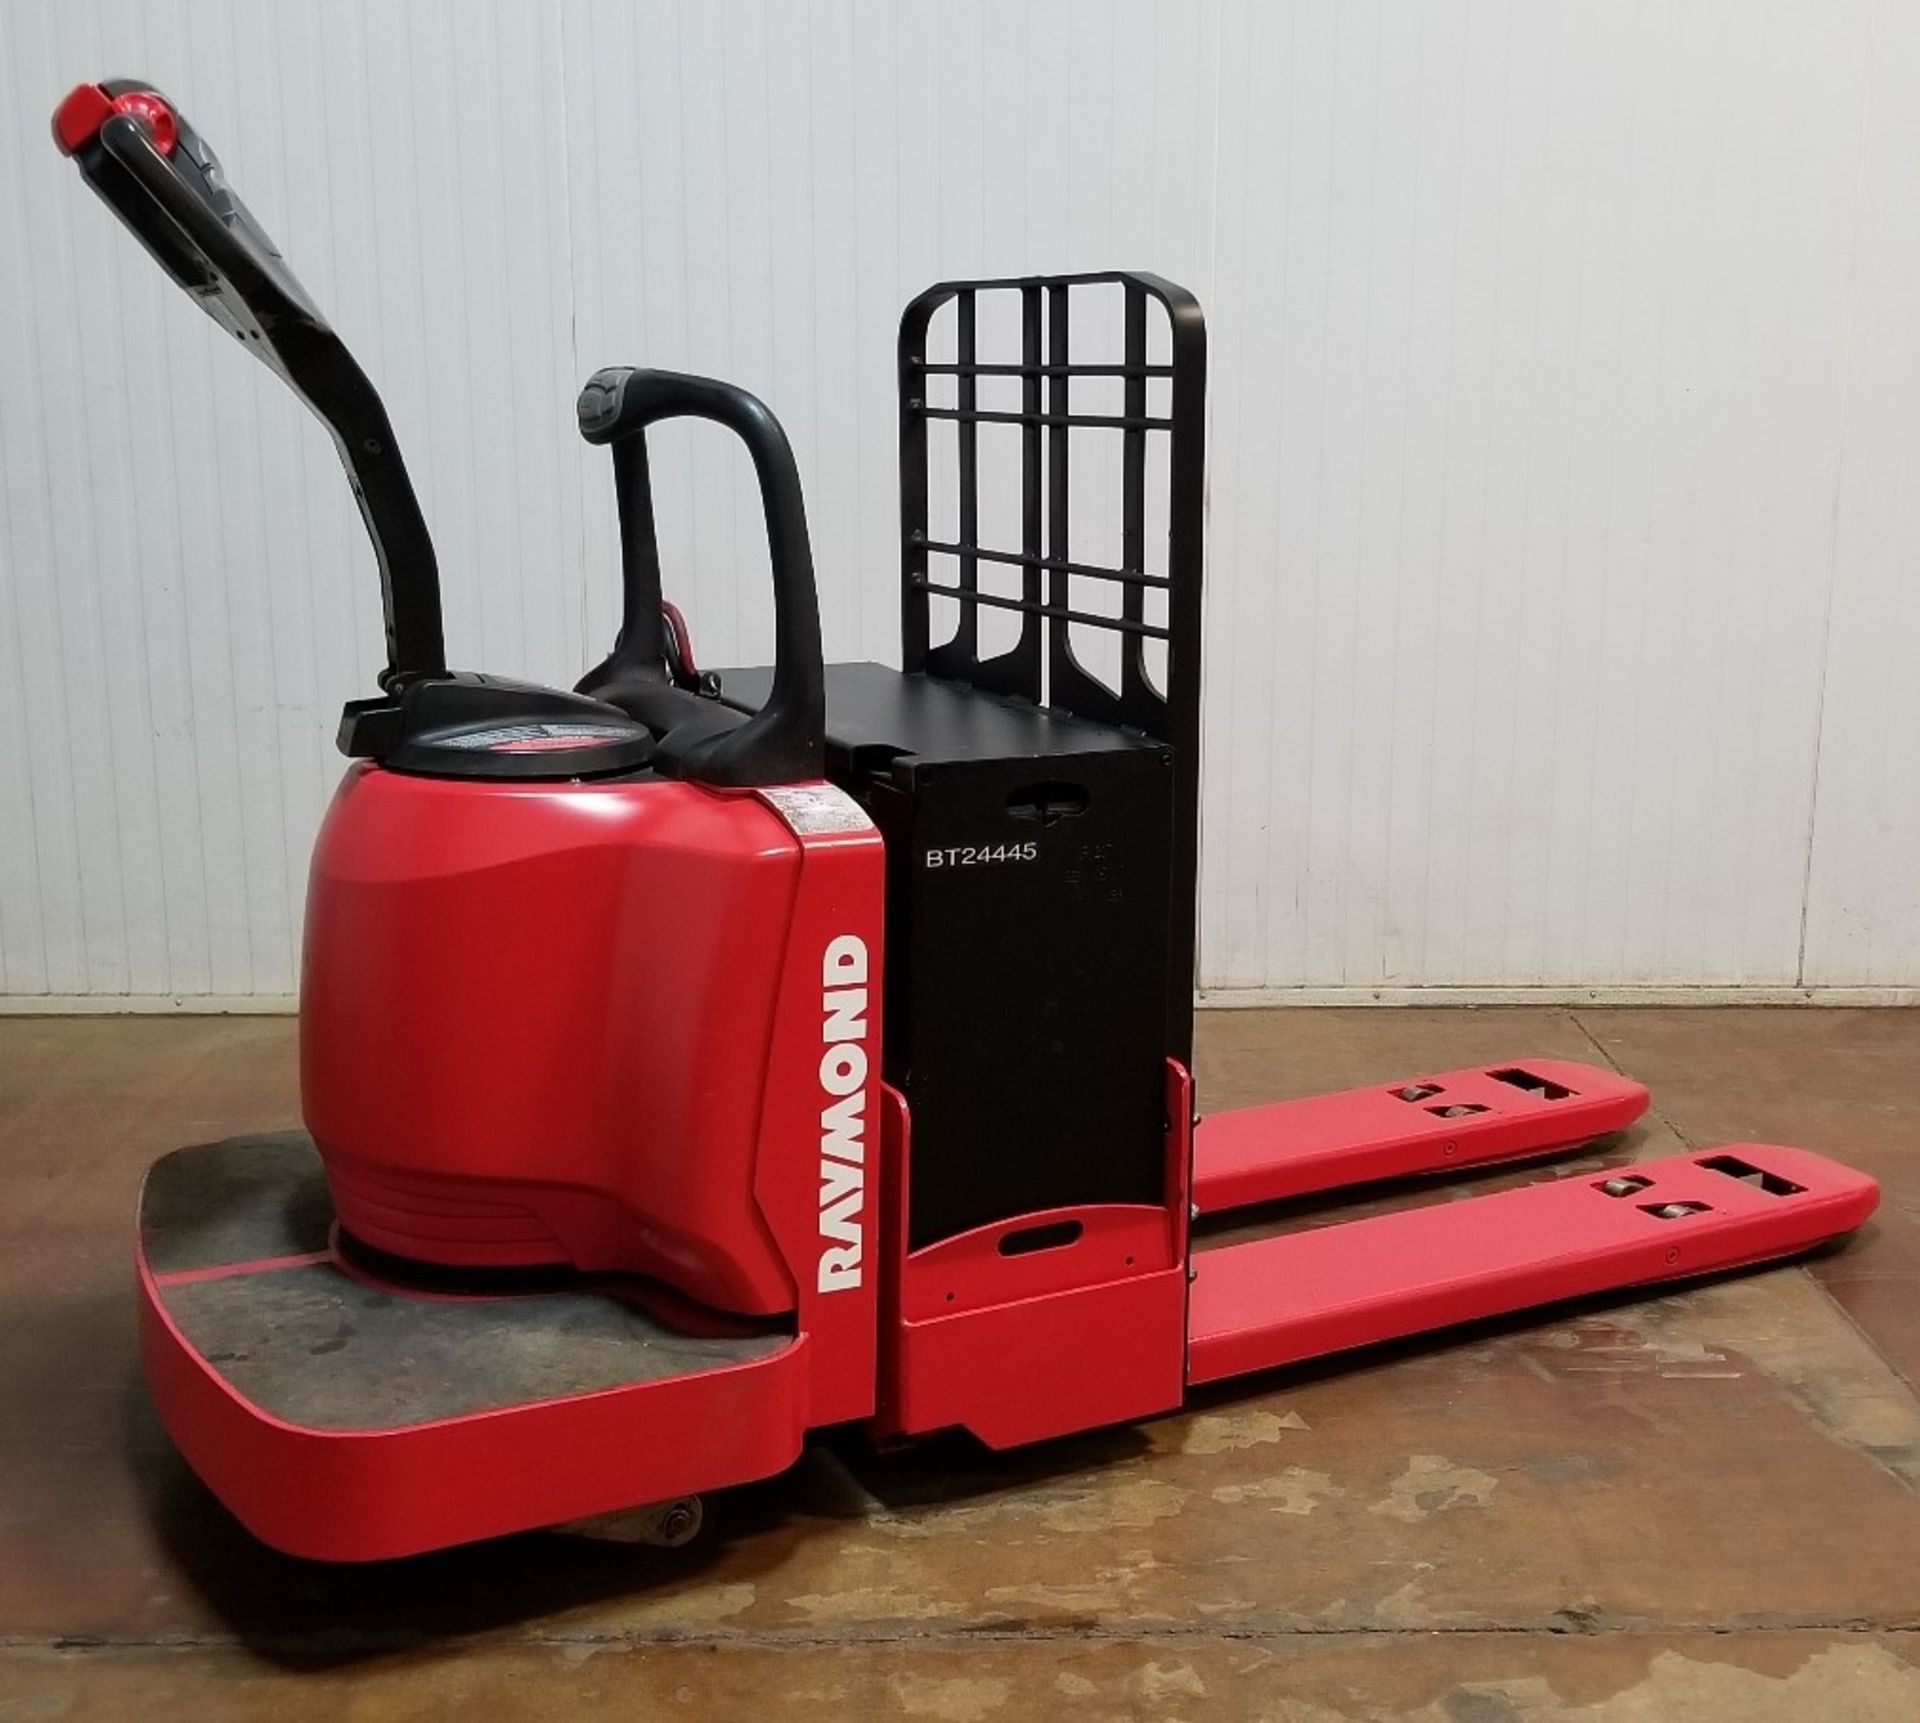 RAYMOND (2010) 8400 24V ELECTRIC RIDEON PALLET JACK WITH 6000 LB. CAPACITY, S/N: 840-10-84375 (